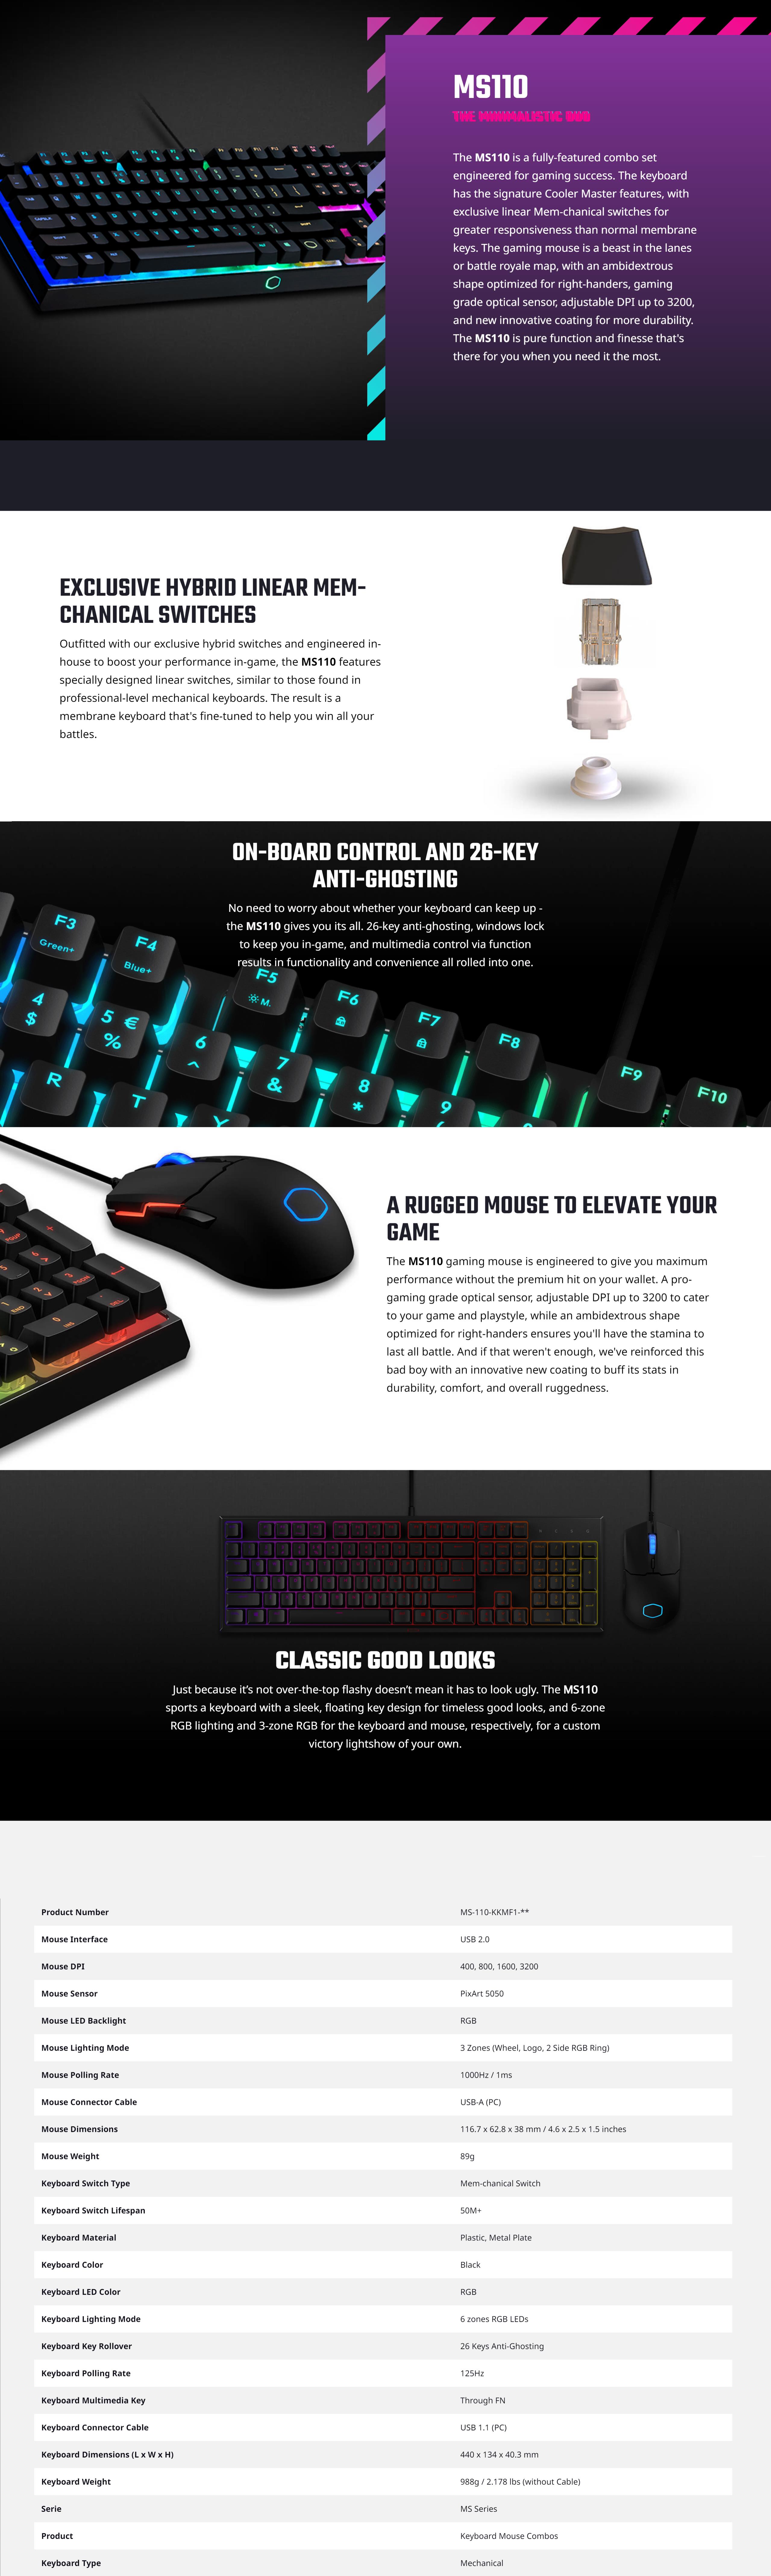 A large marketing image providing additional information about the product Cooler Master MasterSet MS110 RGB Keyboard and Mouse Combo - Additional alt info not provided